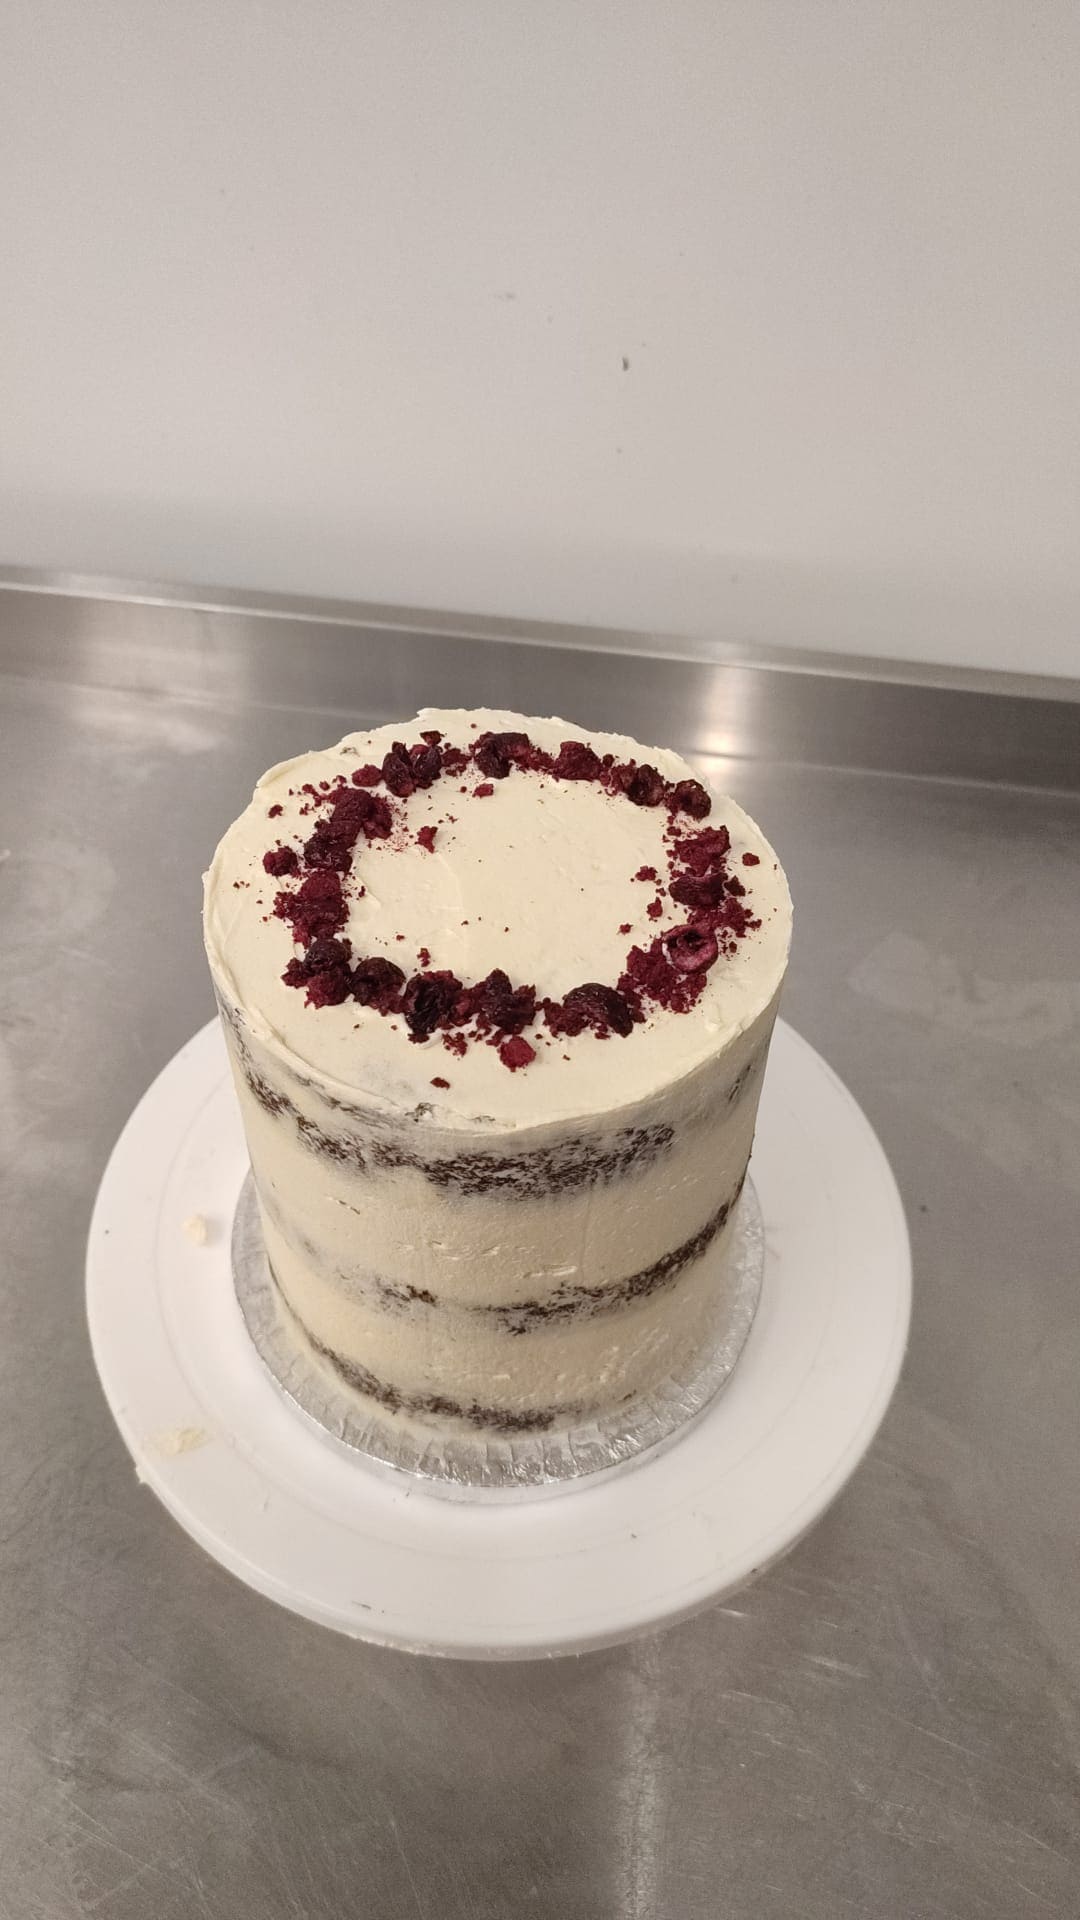 A No Guilt Bakes custom made low sugar cake sitting on a plate with raspberries on it, showcasing unique creations available for custom requests.